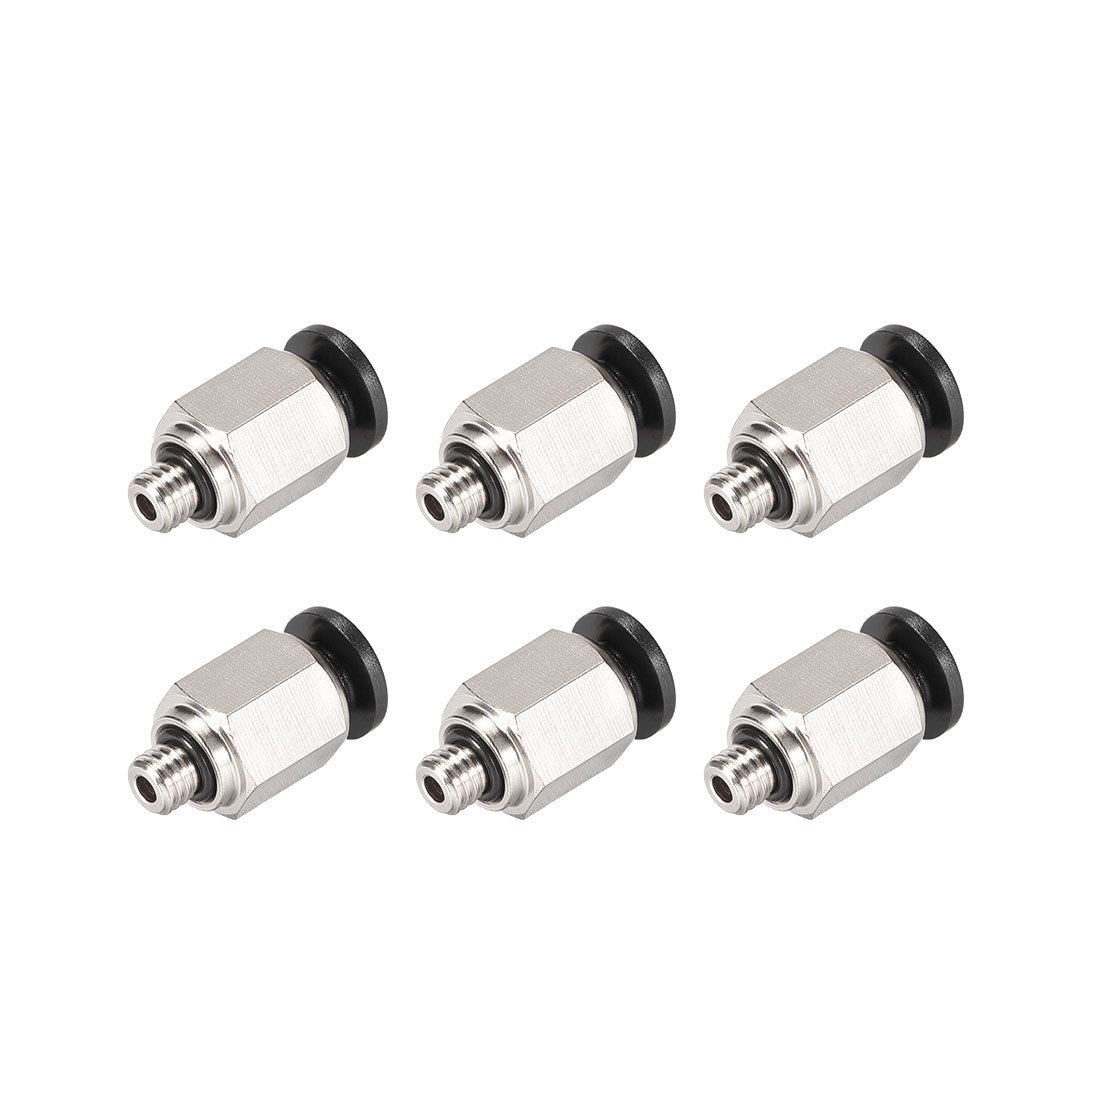 uxcell Uxcell Straight Pneumatic Push to Quick Connect Fittings M5 Male x 4mm Tube OD Silver Tone 6pcs